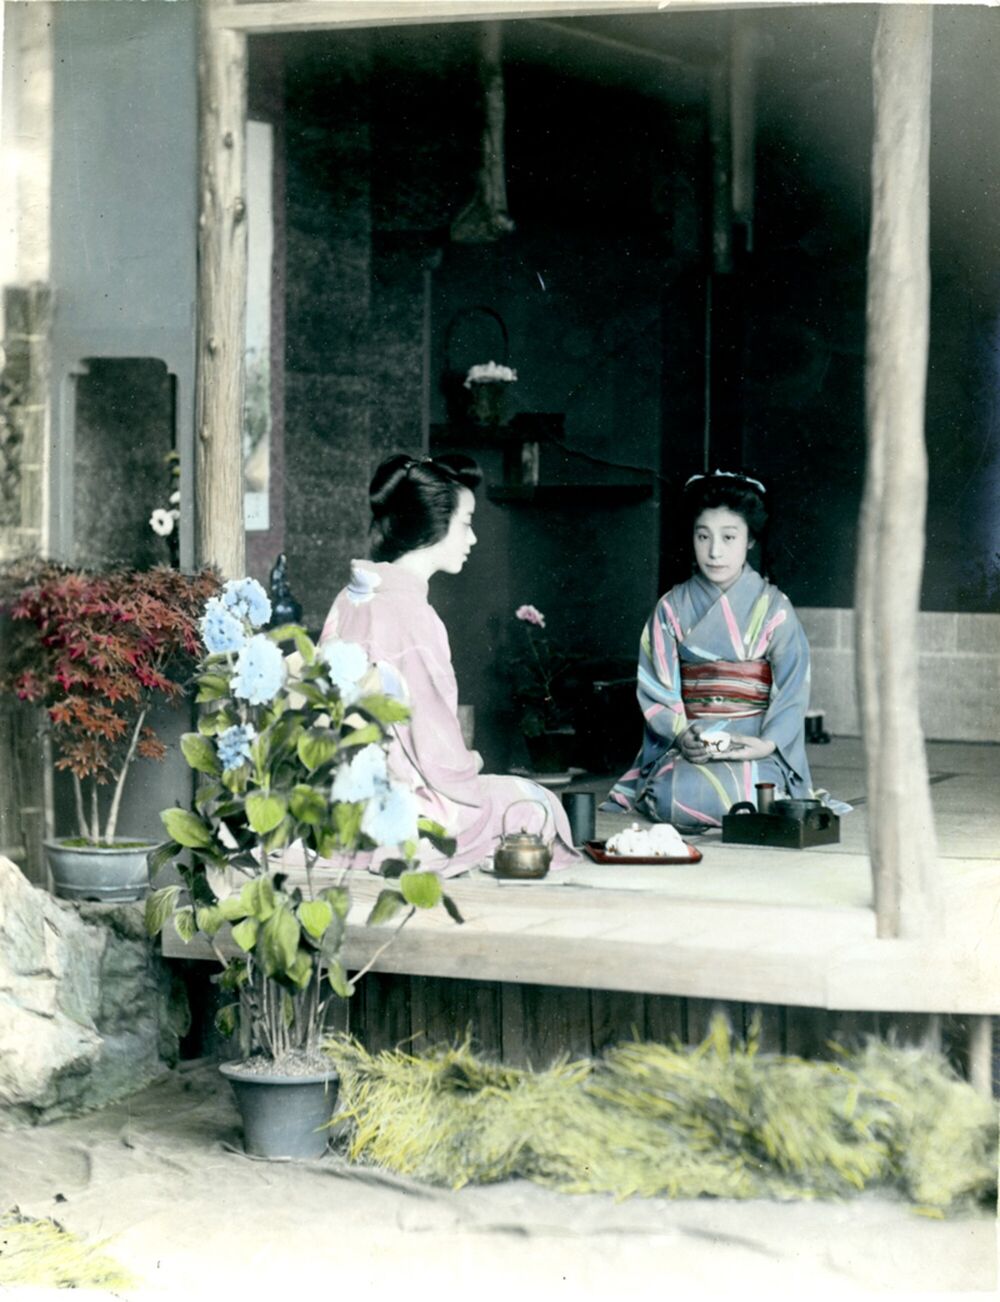 Coloured print showing a Japanese tea ceremony, with two women in Japanese costume.